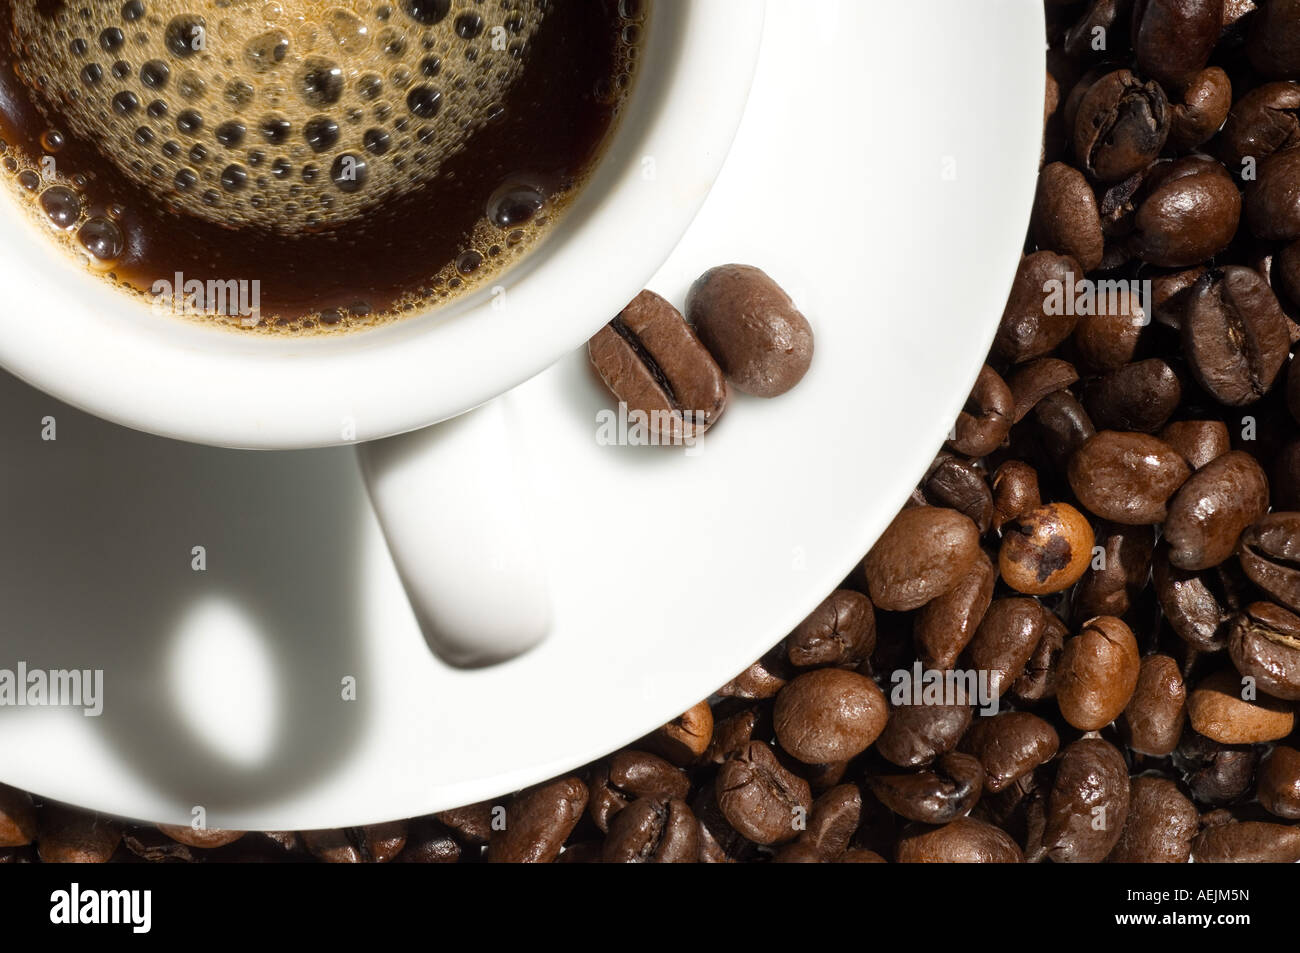 A cup of coffee near roasted coffee beans Stock Photo